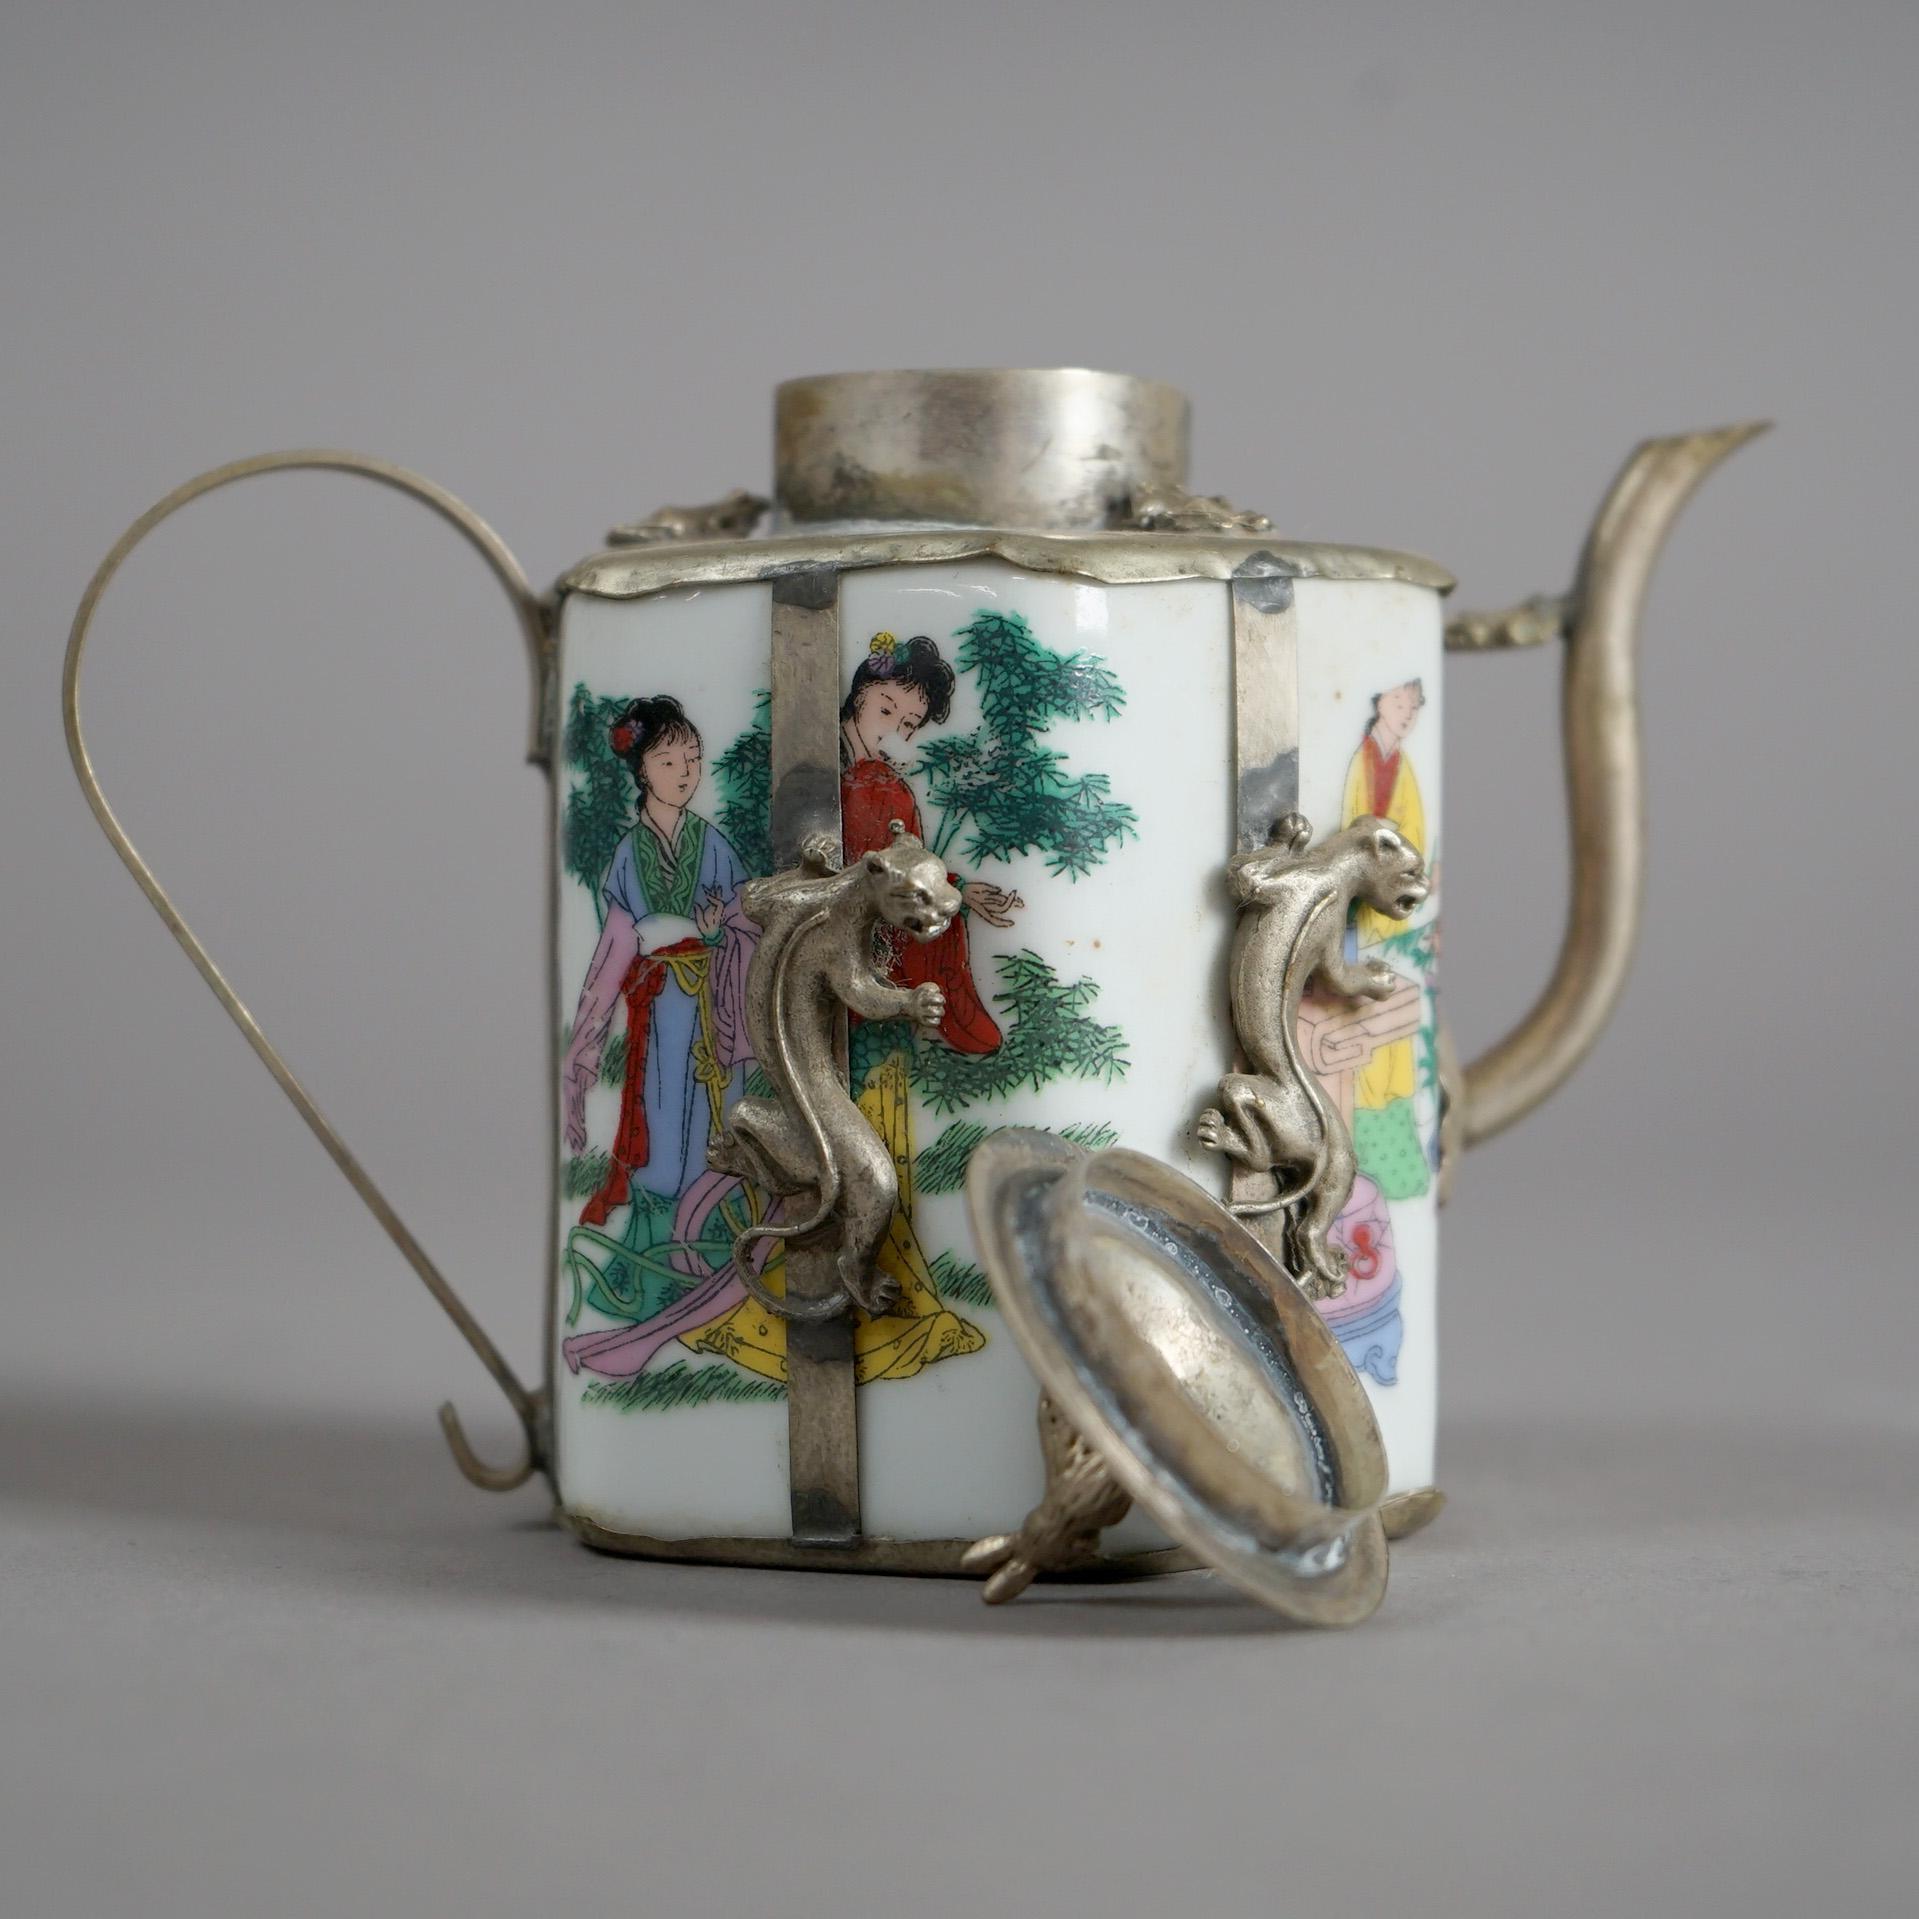 Chinese Miniature Porcelain Teapot with Silver Overlay 20thC For Sale 3